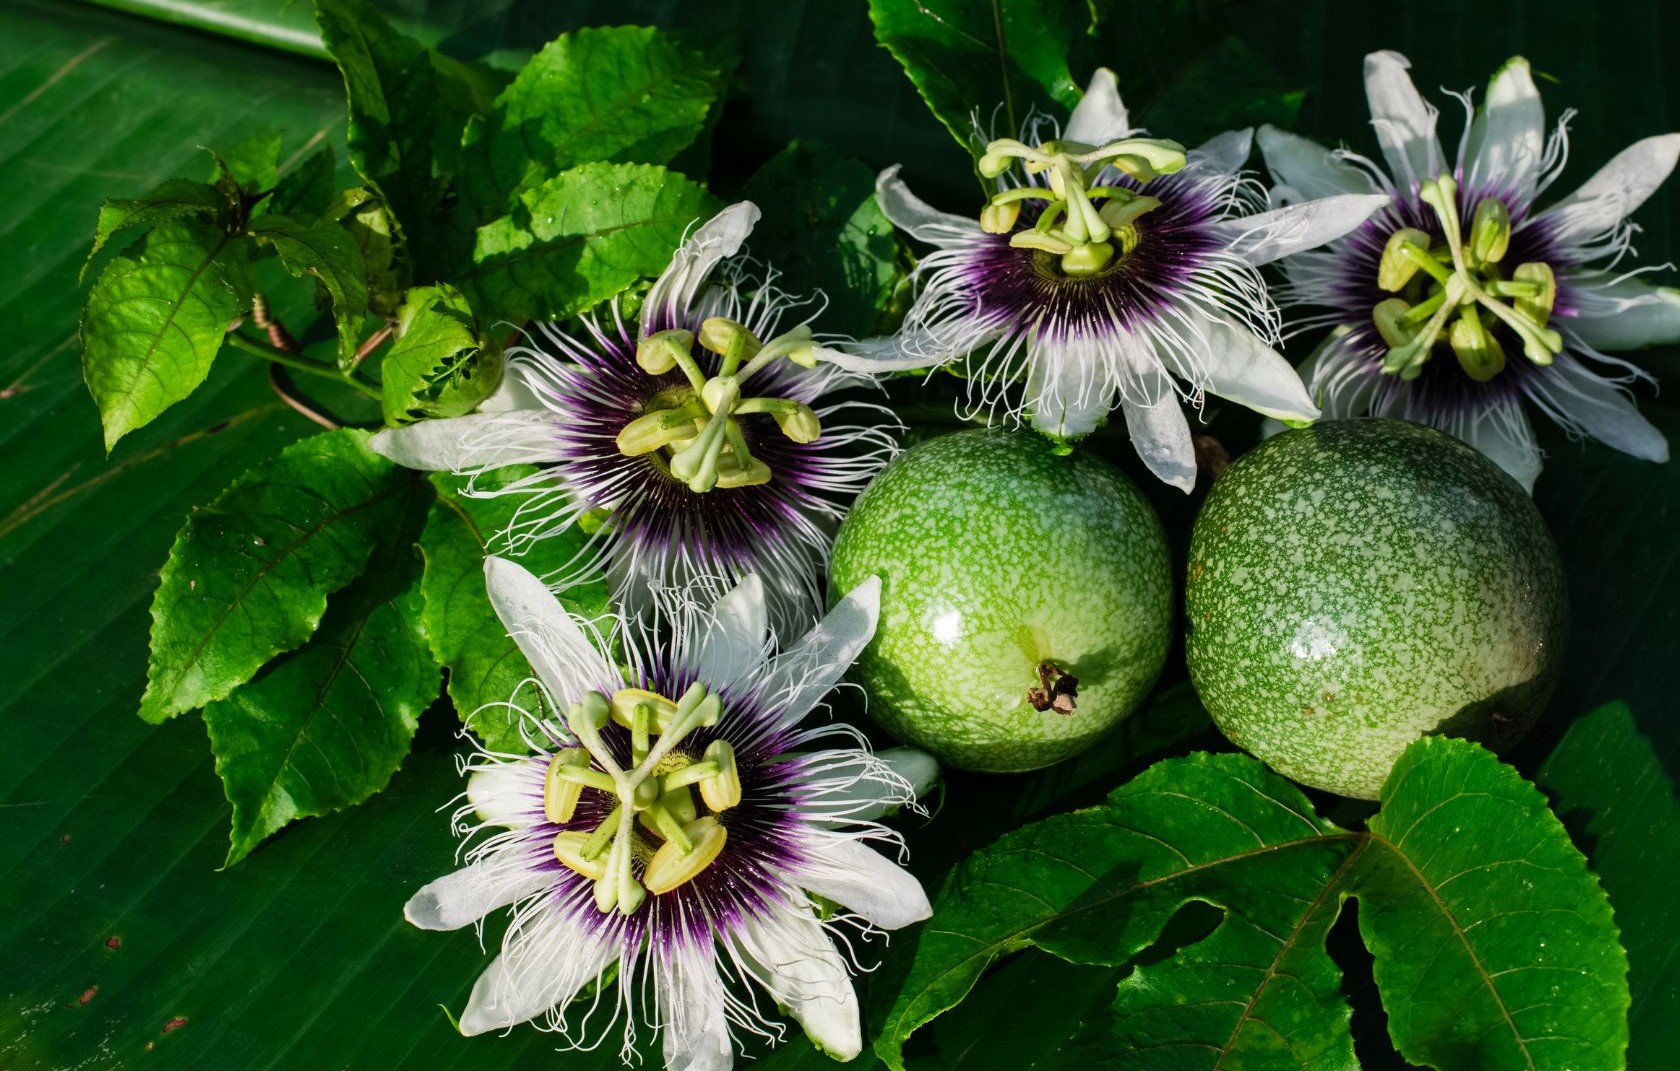 Passion fruit: Types-Varieties of Passion Fruit and Plant